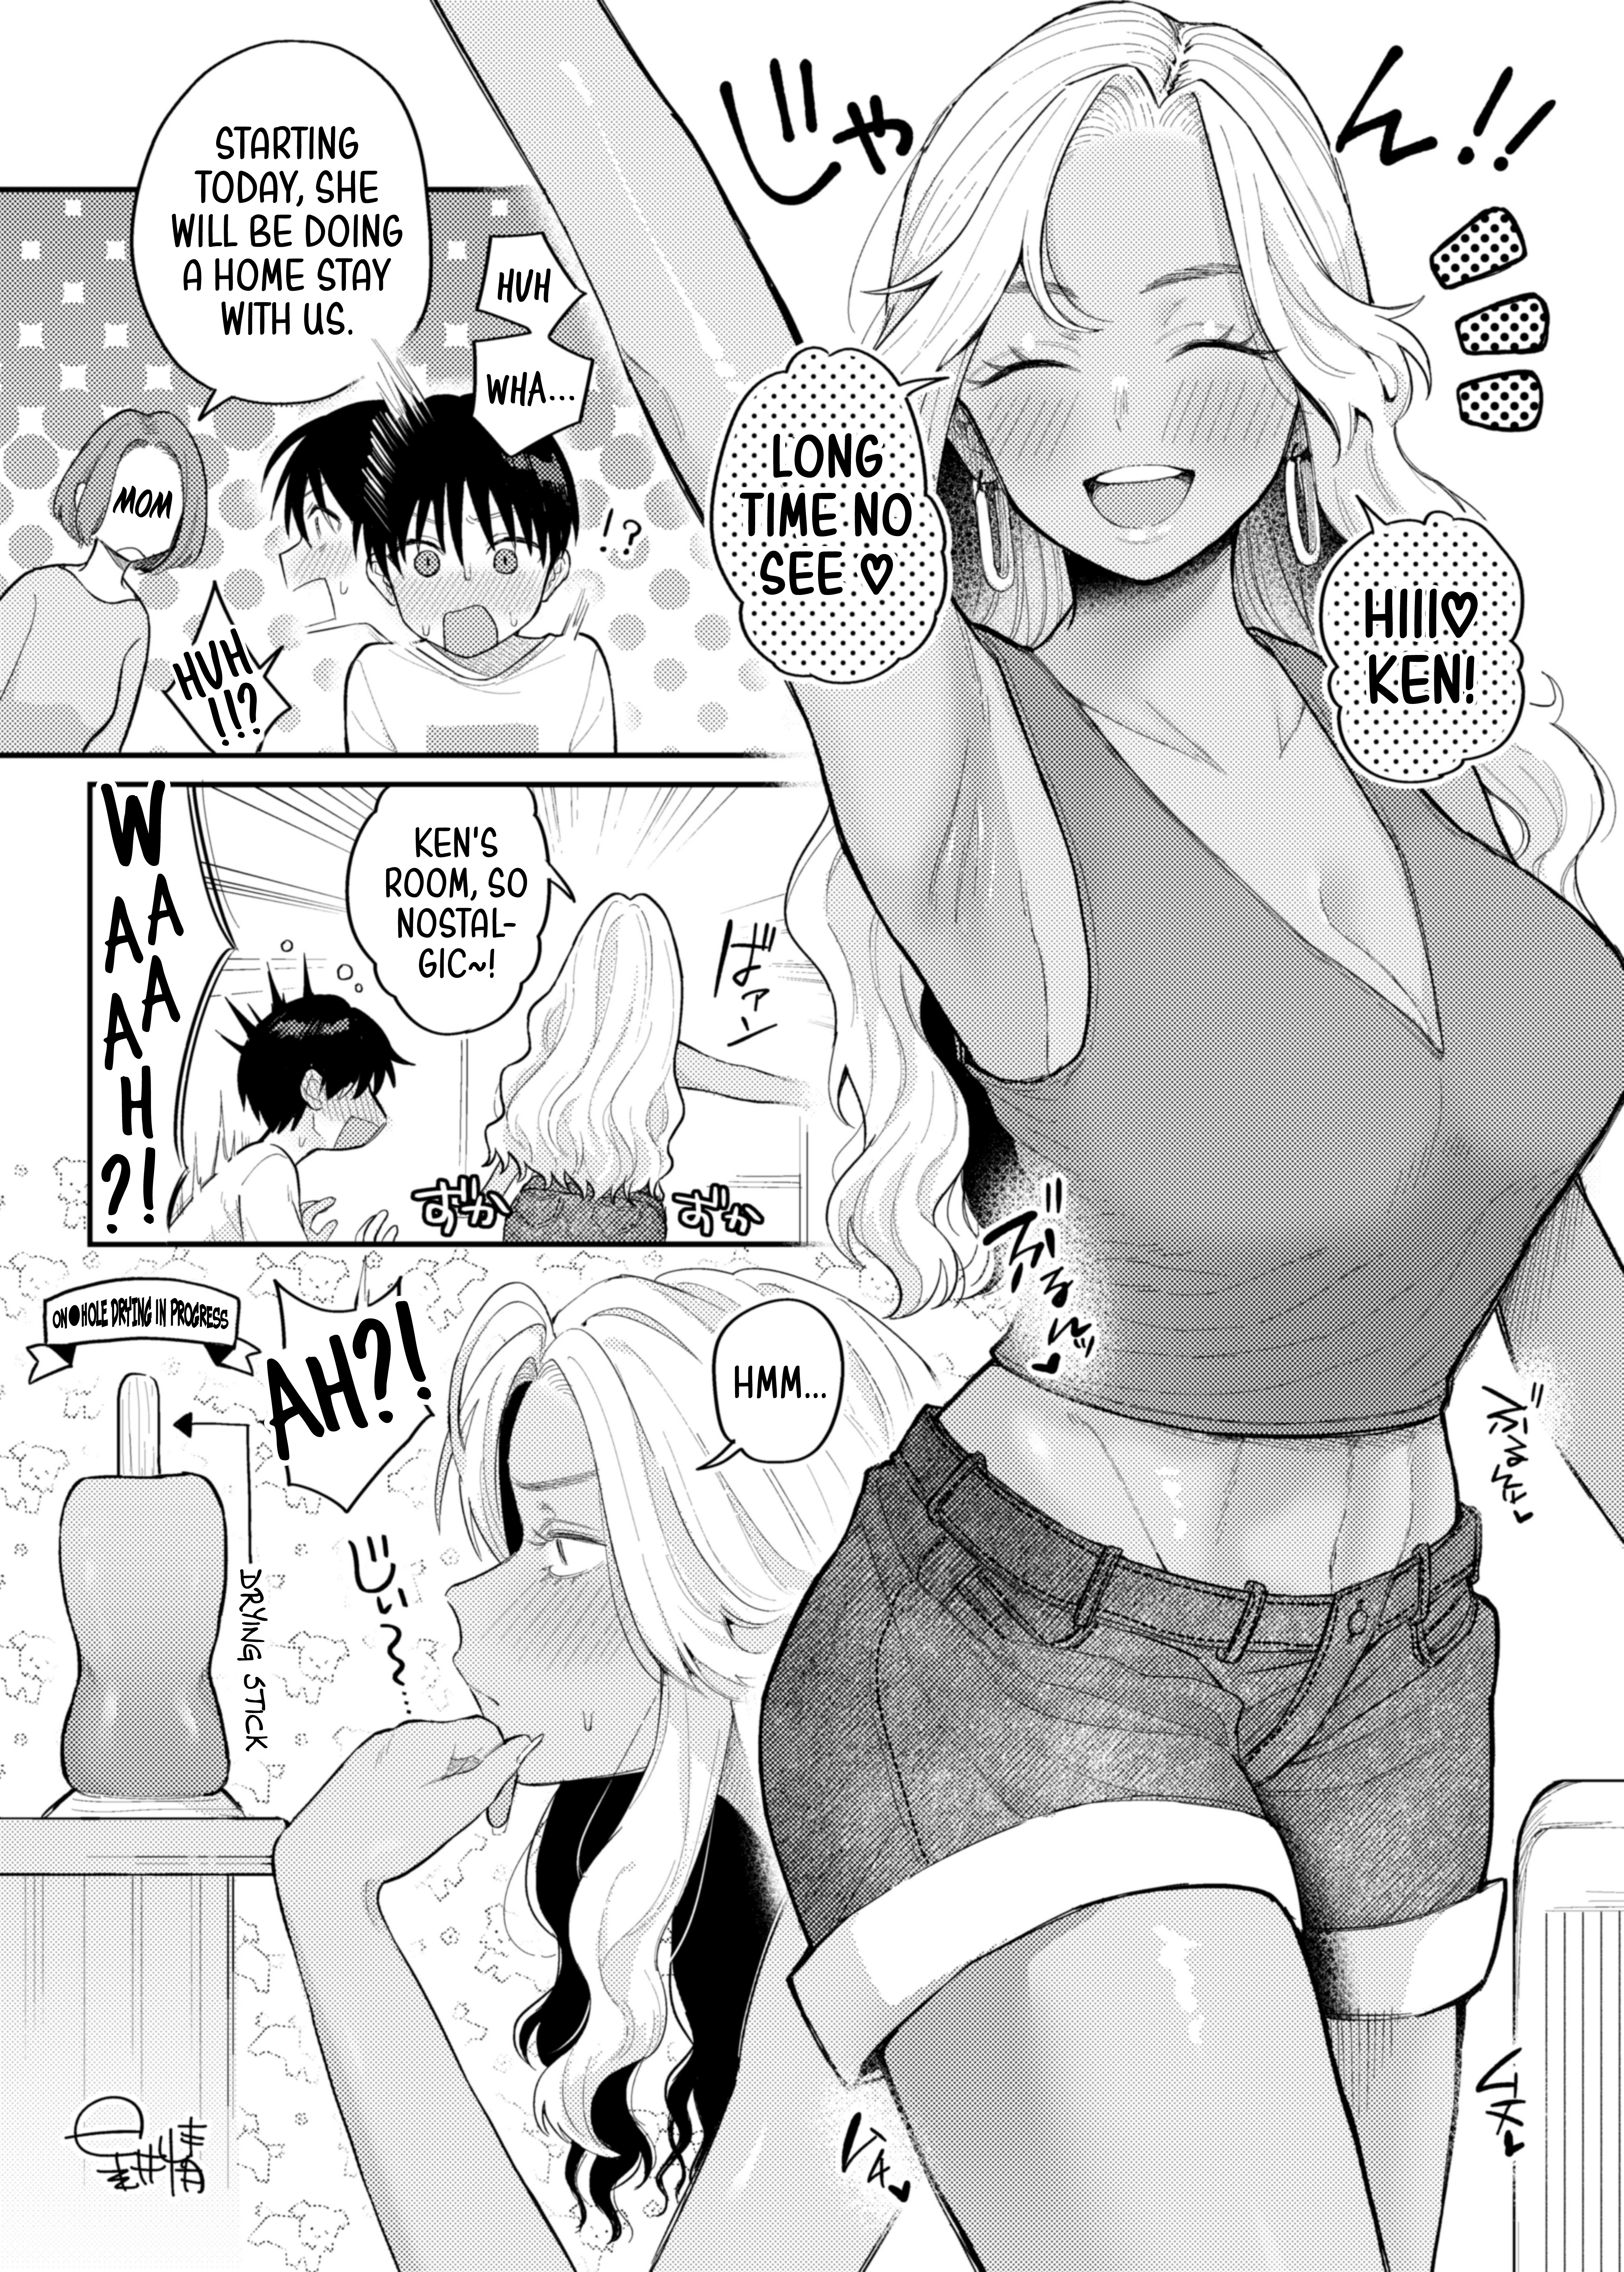 A Distant Relative's Beautiful Latina Woman Came To Stay With Us manga